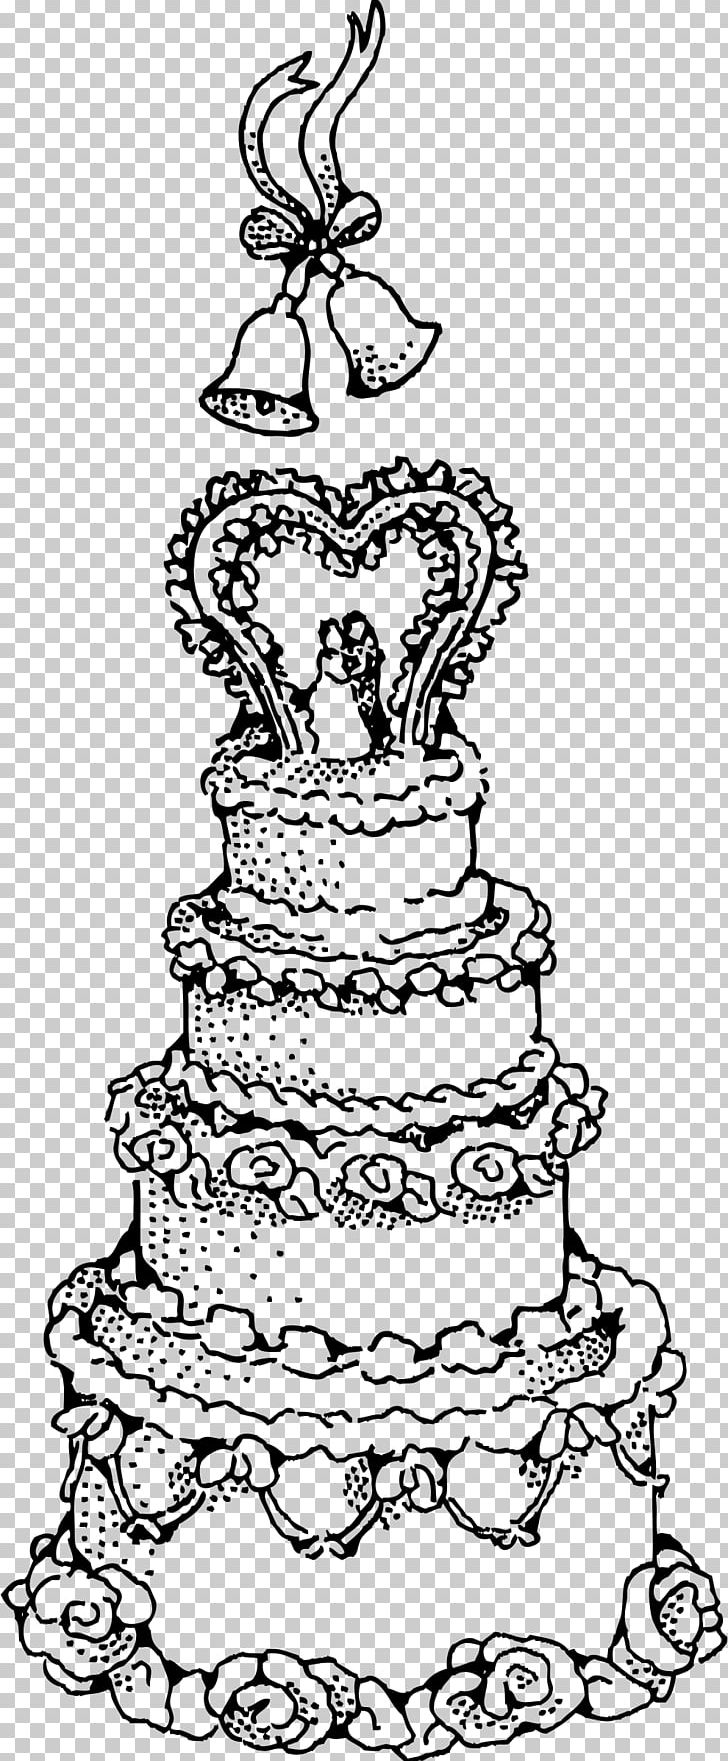 Wedding Cake Party Birthday Cake PNG, Clipart, Art, Birthday, Birthday Cake, Black, Black And White Free PNG Download